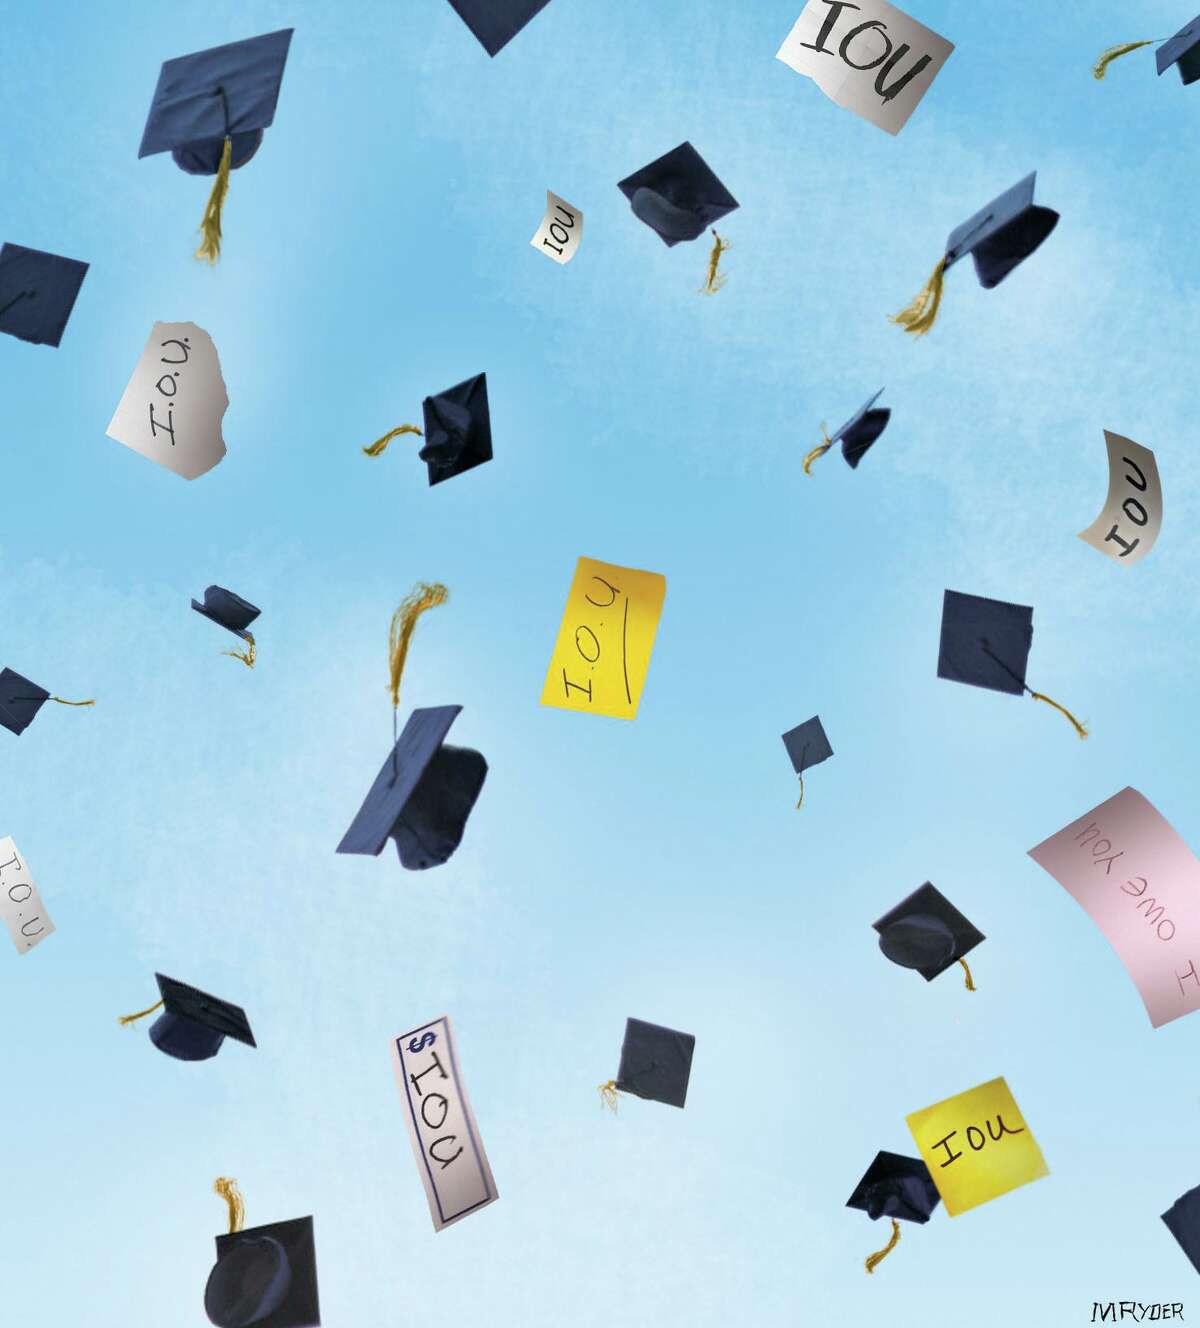 This artwork by M. Ryder relates to college graduates and their looming educational debt.